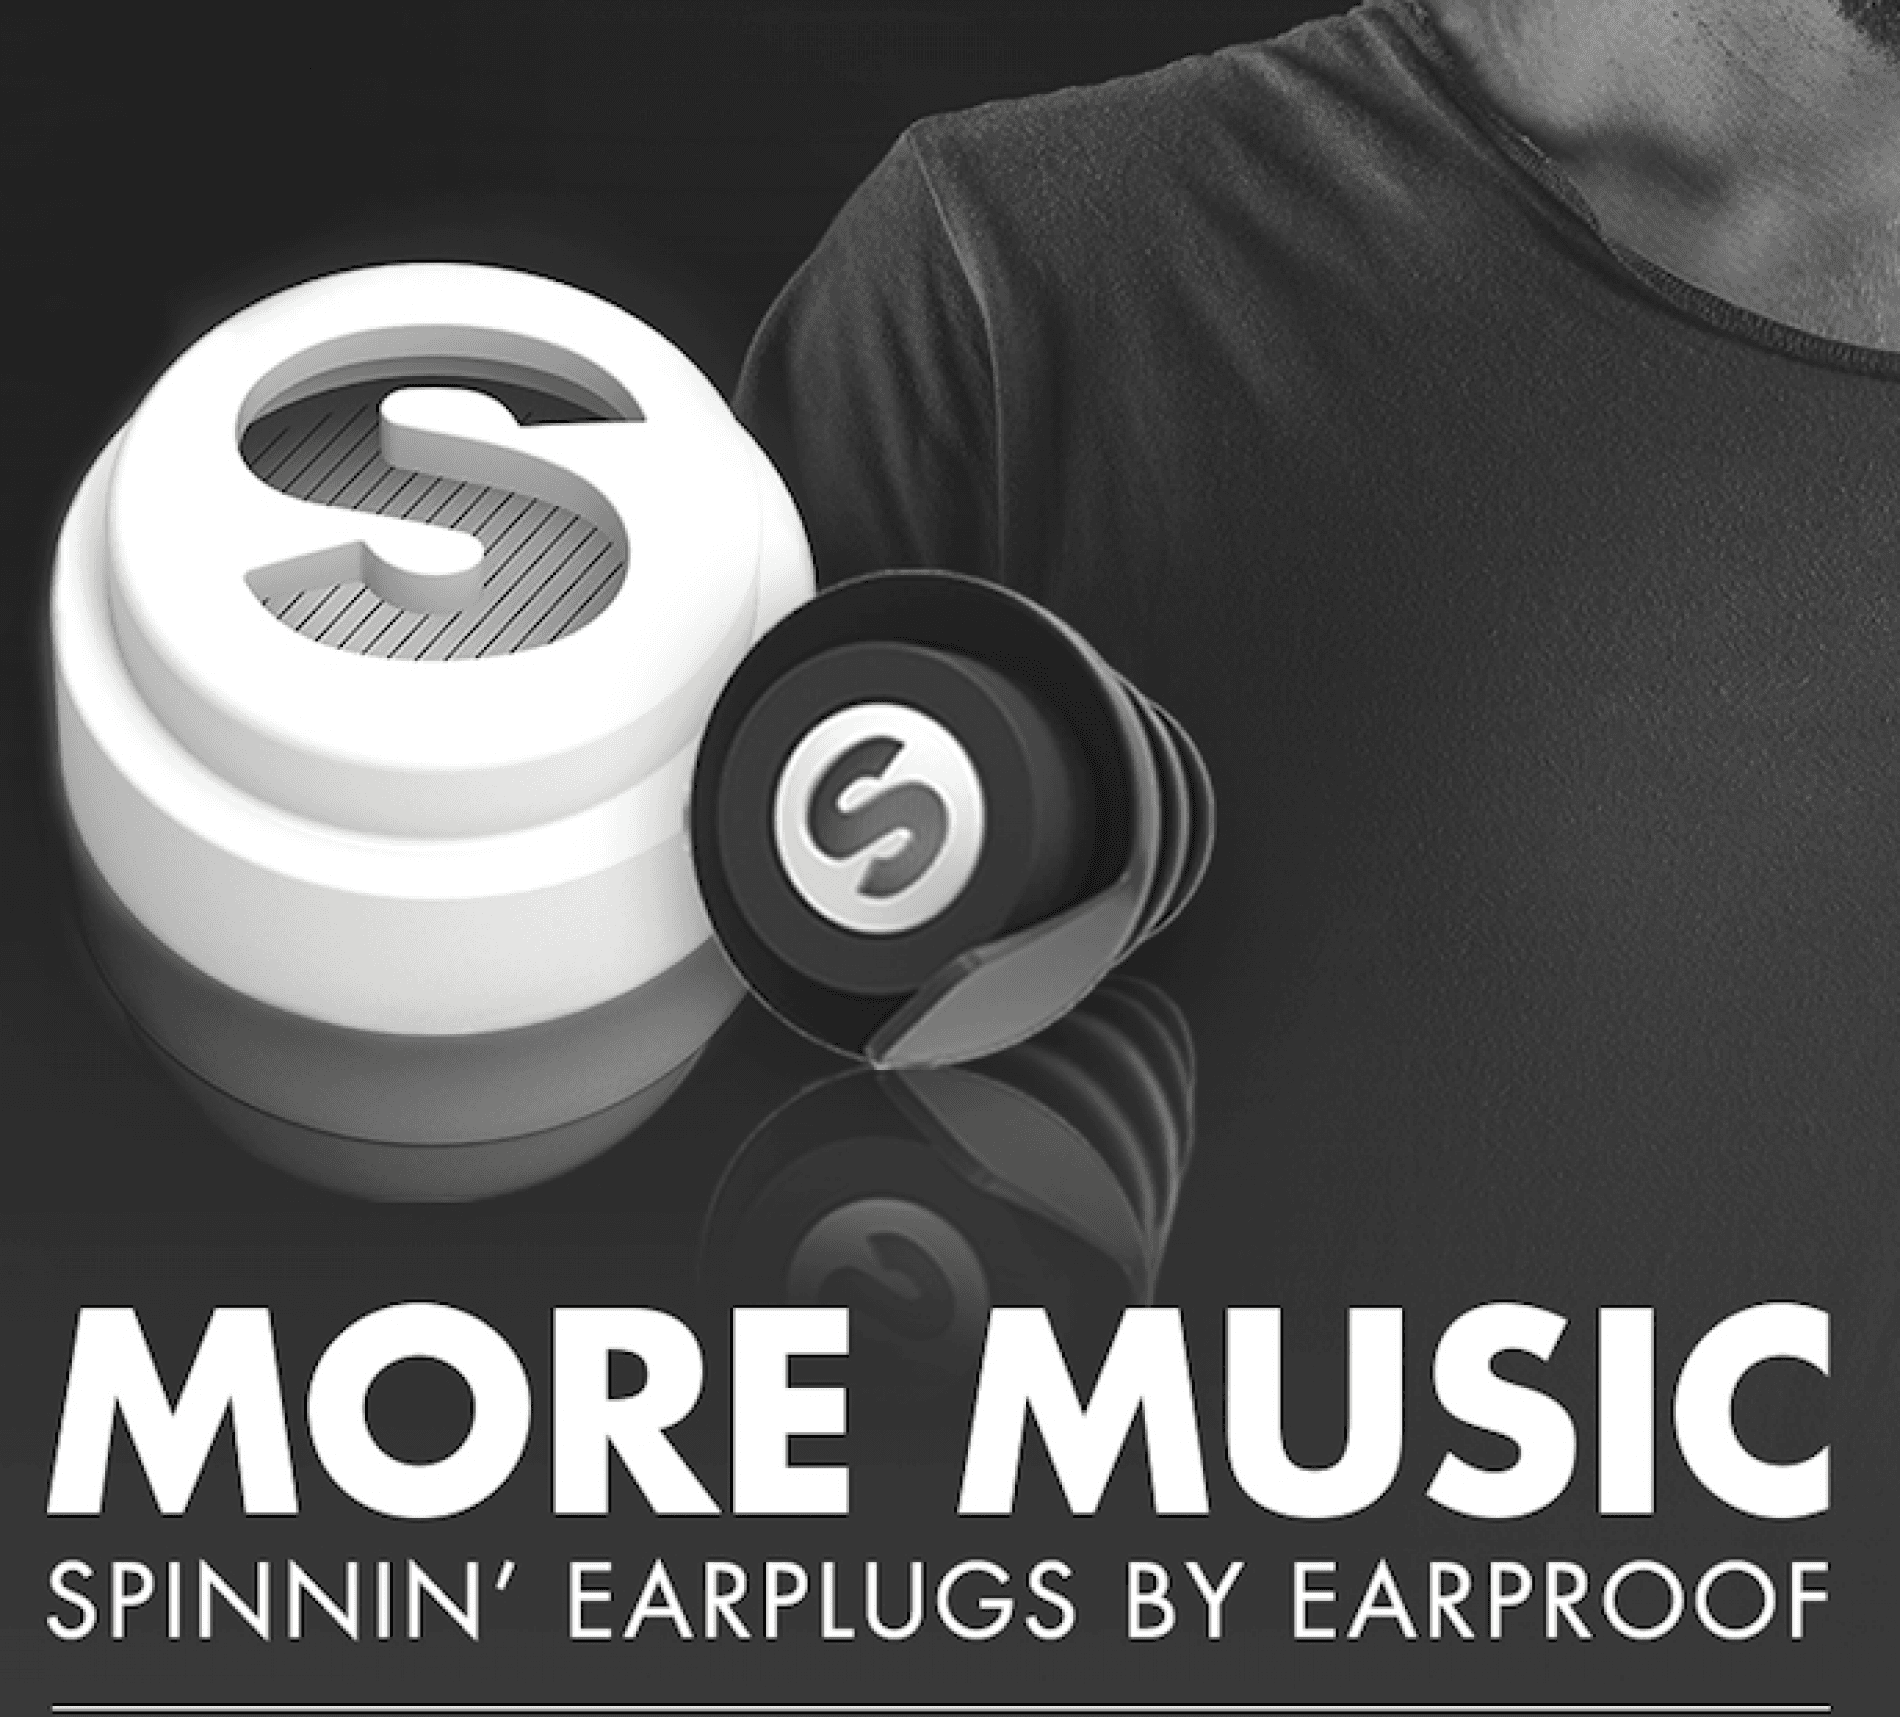 Spinnin' Records & Earproof team up for exclusive earplugs